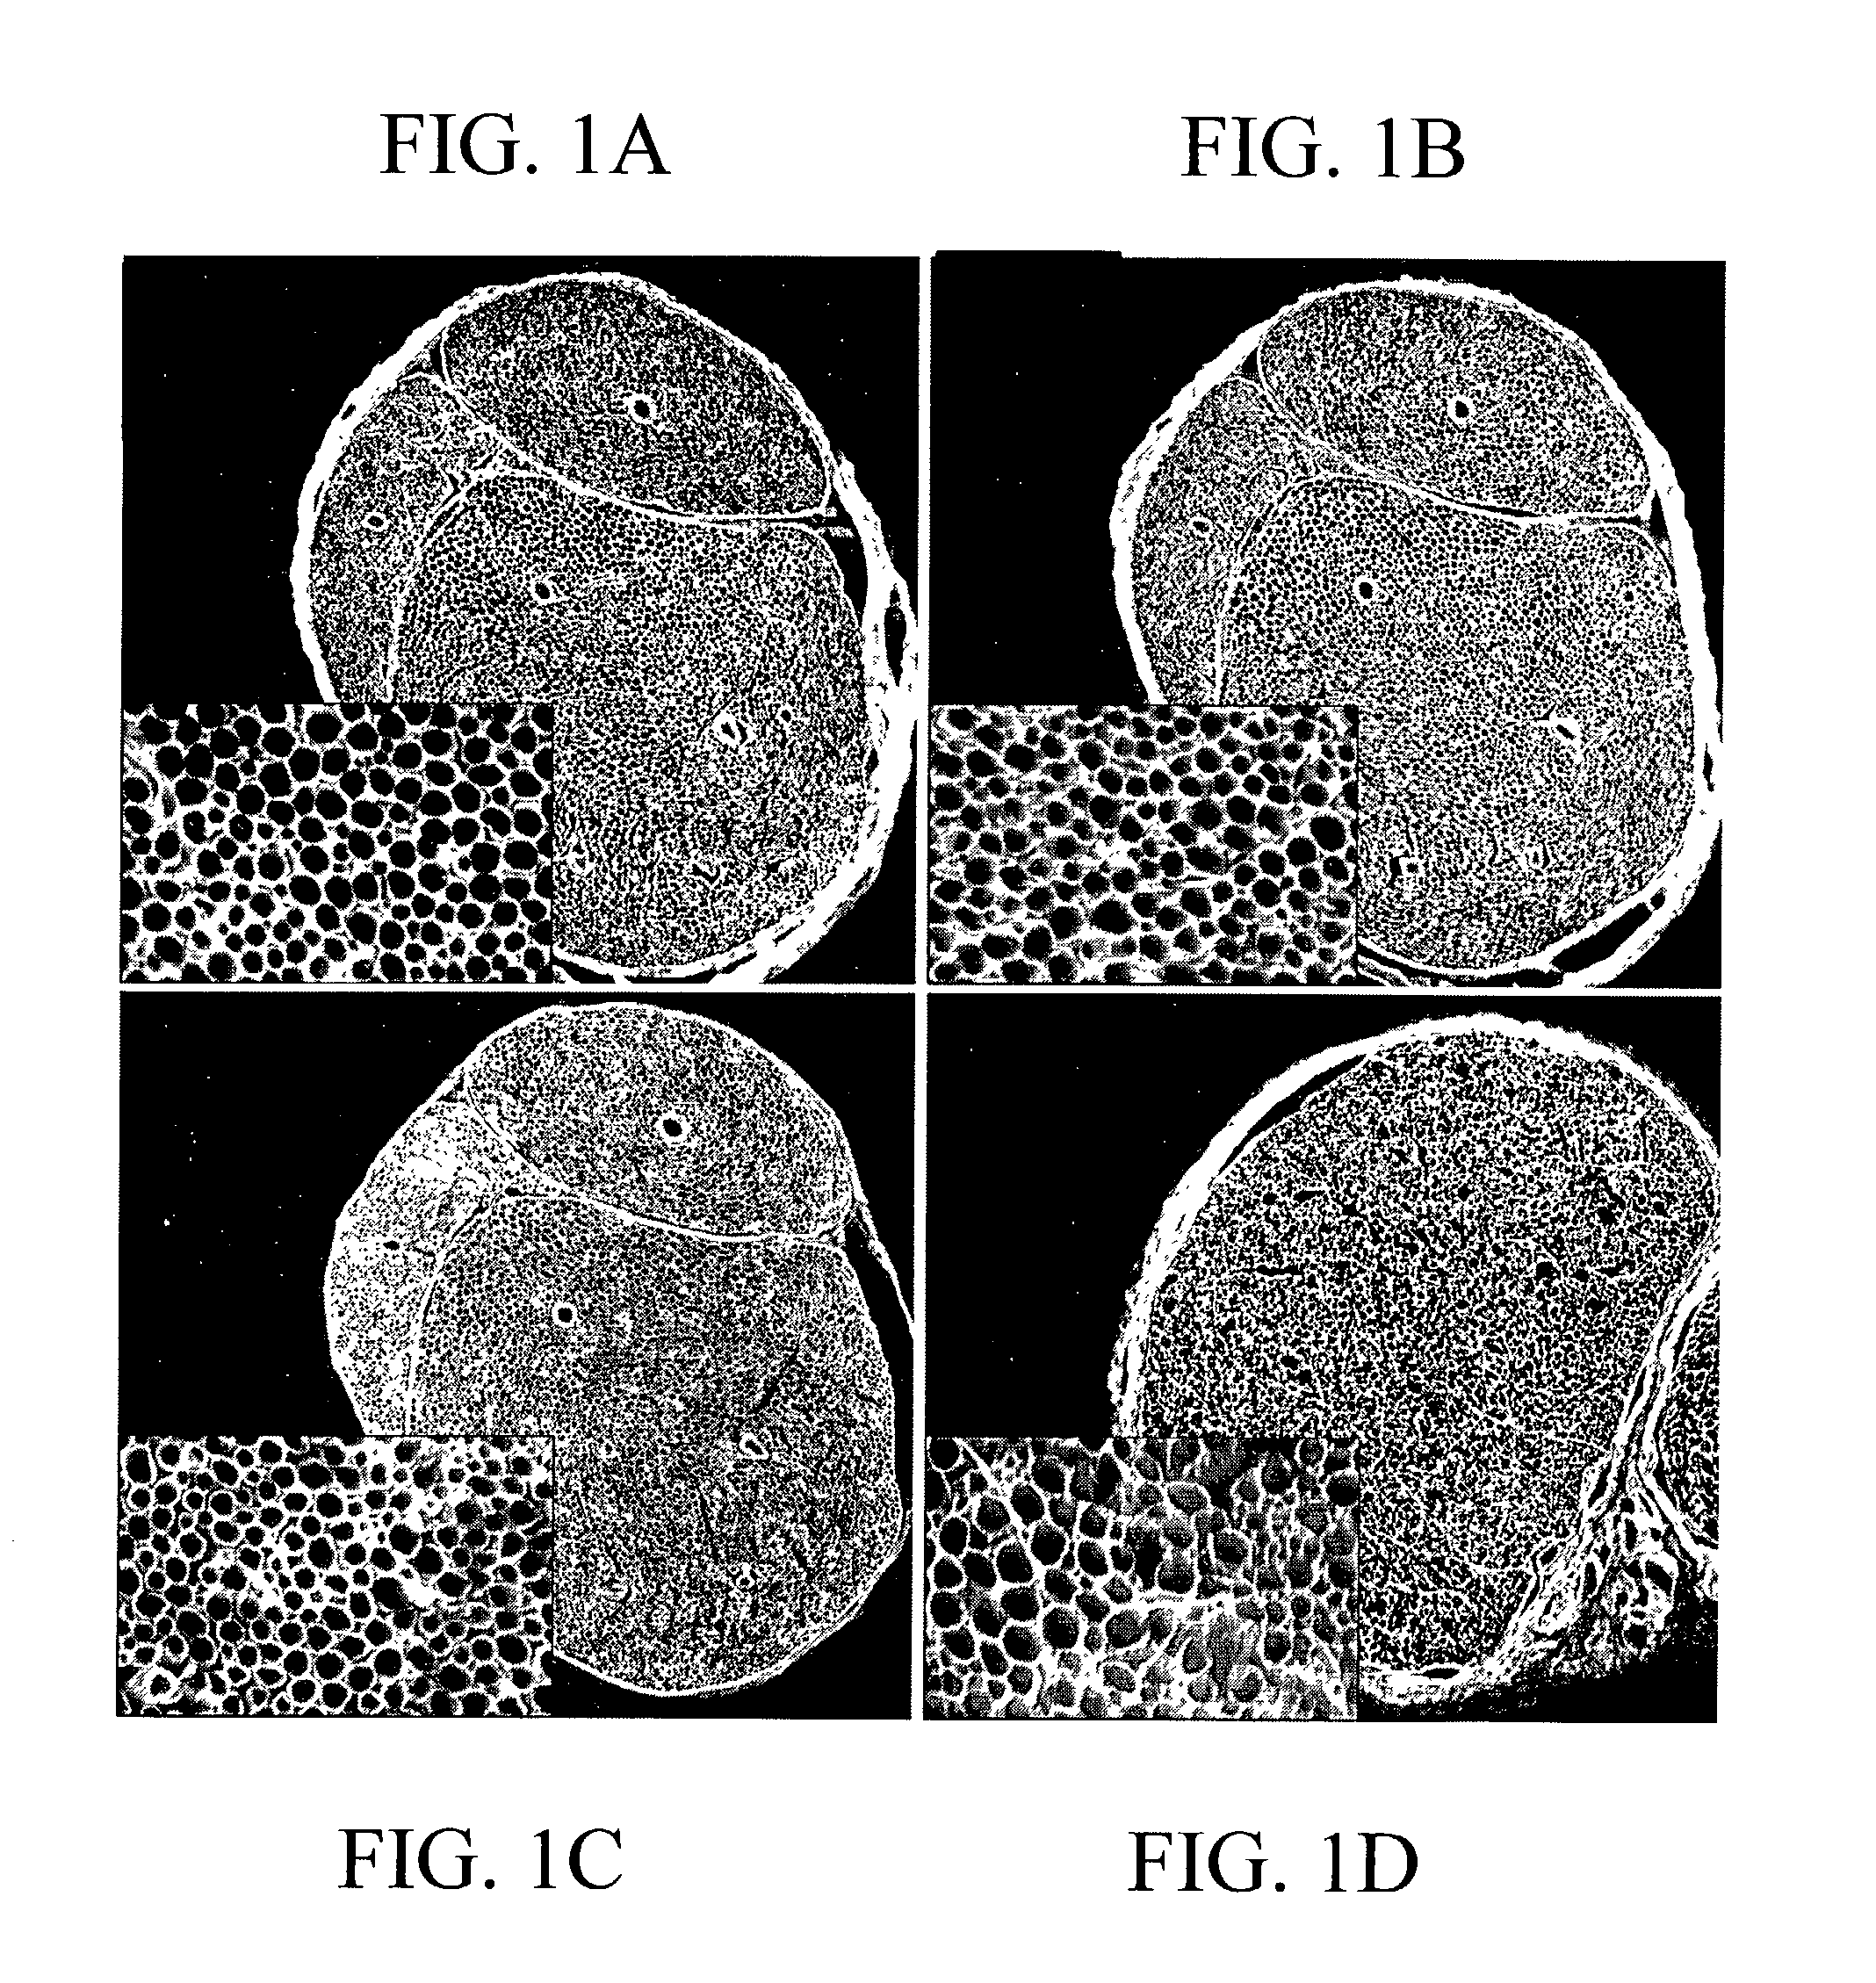 Materials and methods for nerve grafting, selection of nerve grafts, and in vitro nerve tissue culture